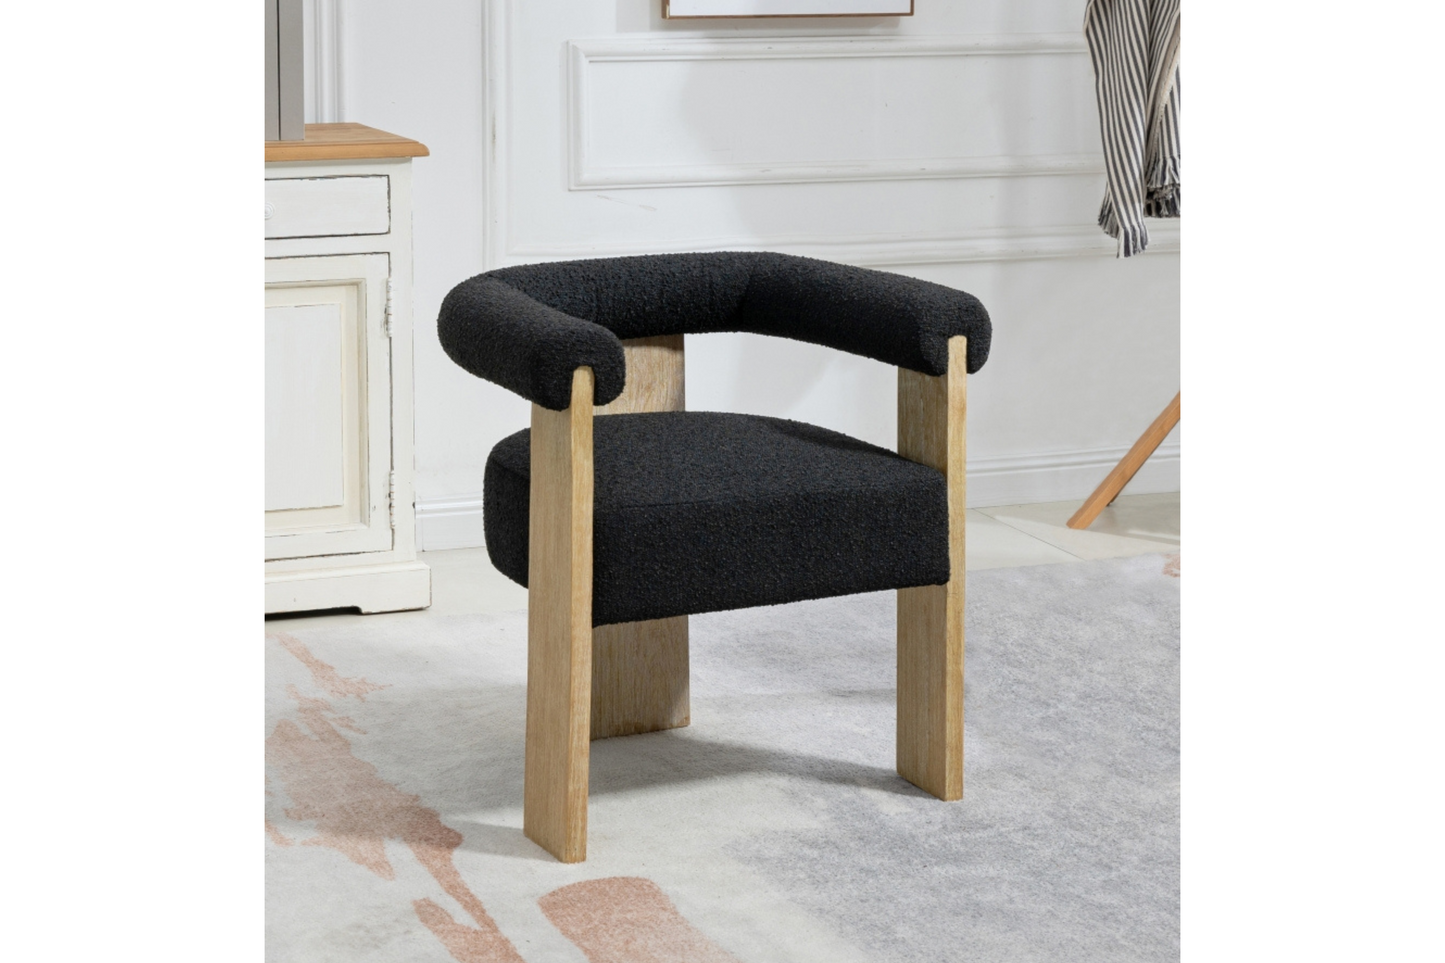 Buy now black dinning chair